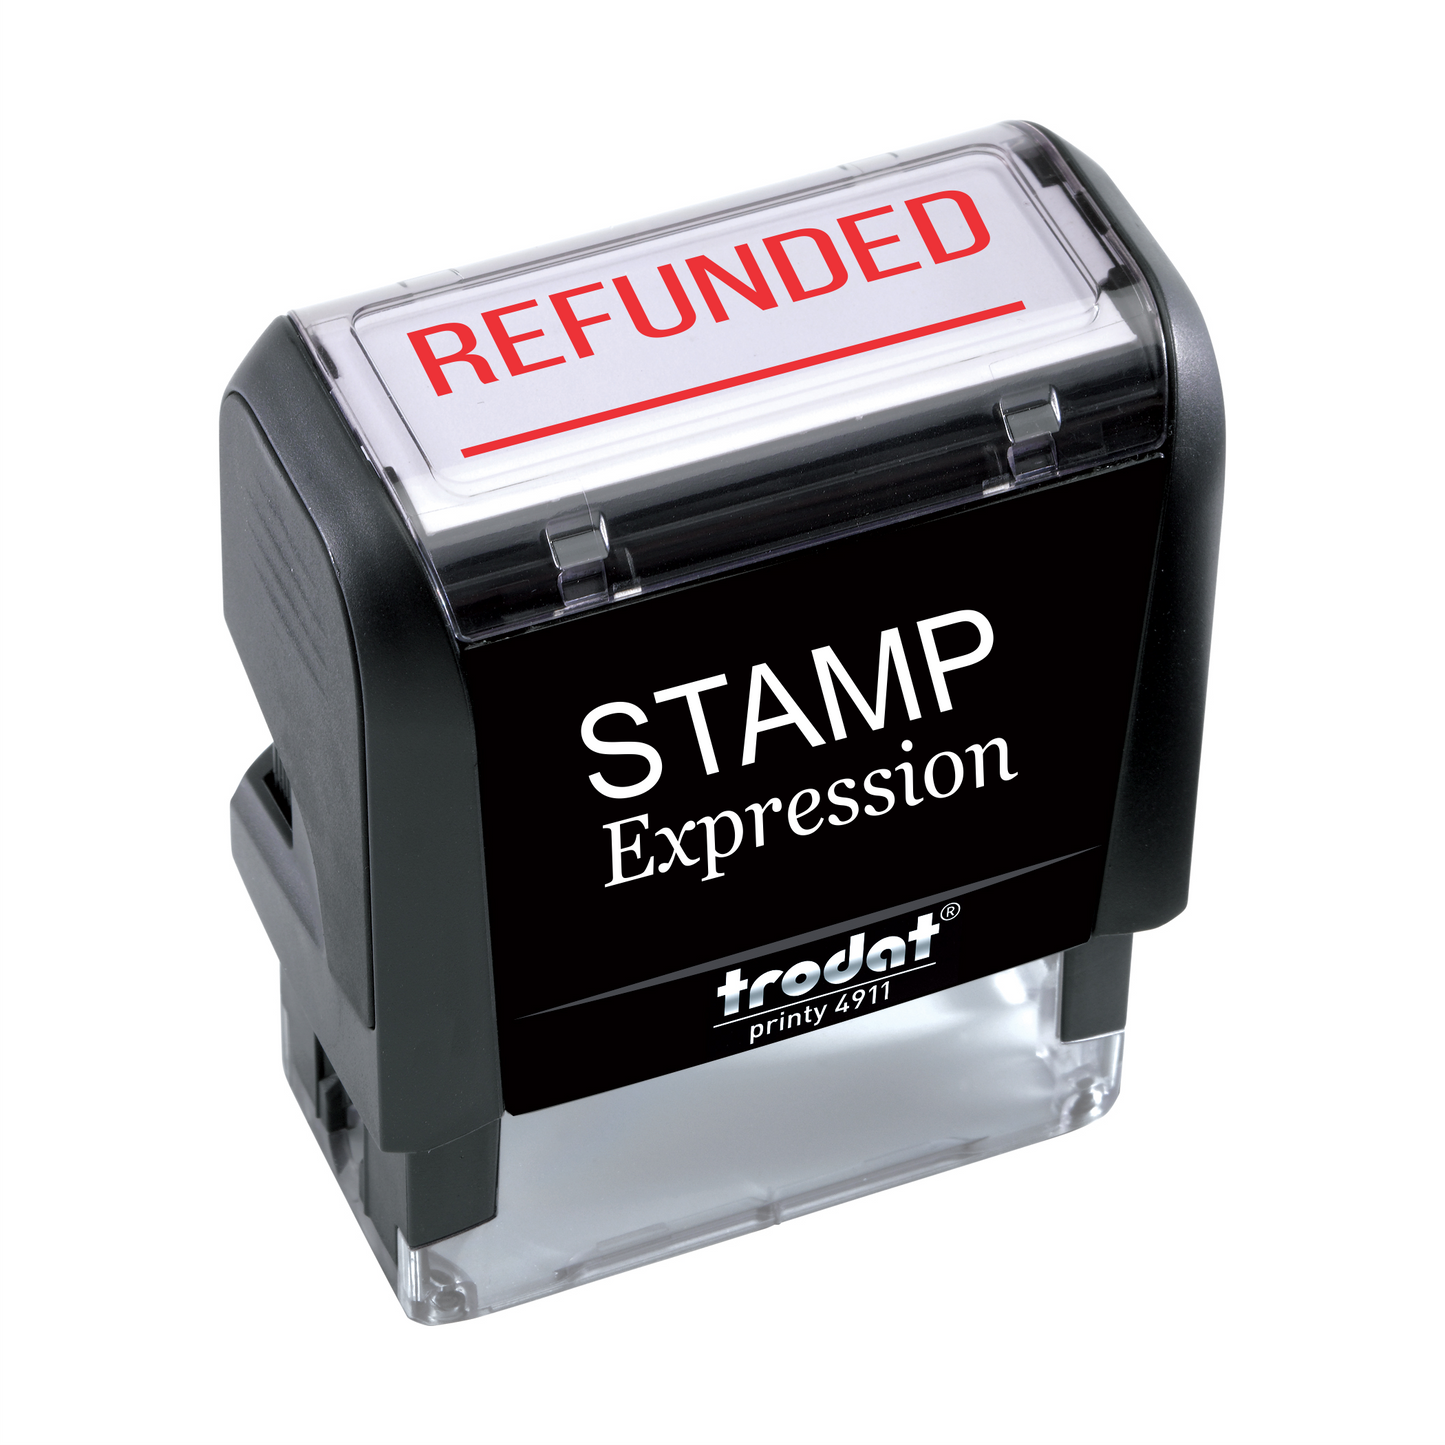 REFUNDED with line Office Self Inking Rubber Stamp (SH-5599)